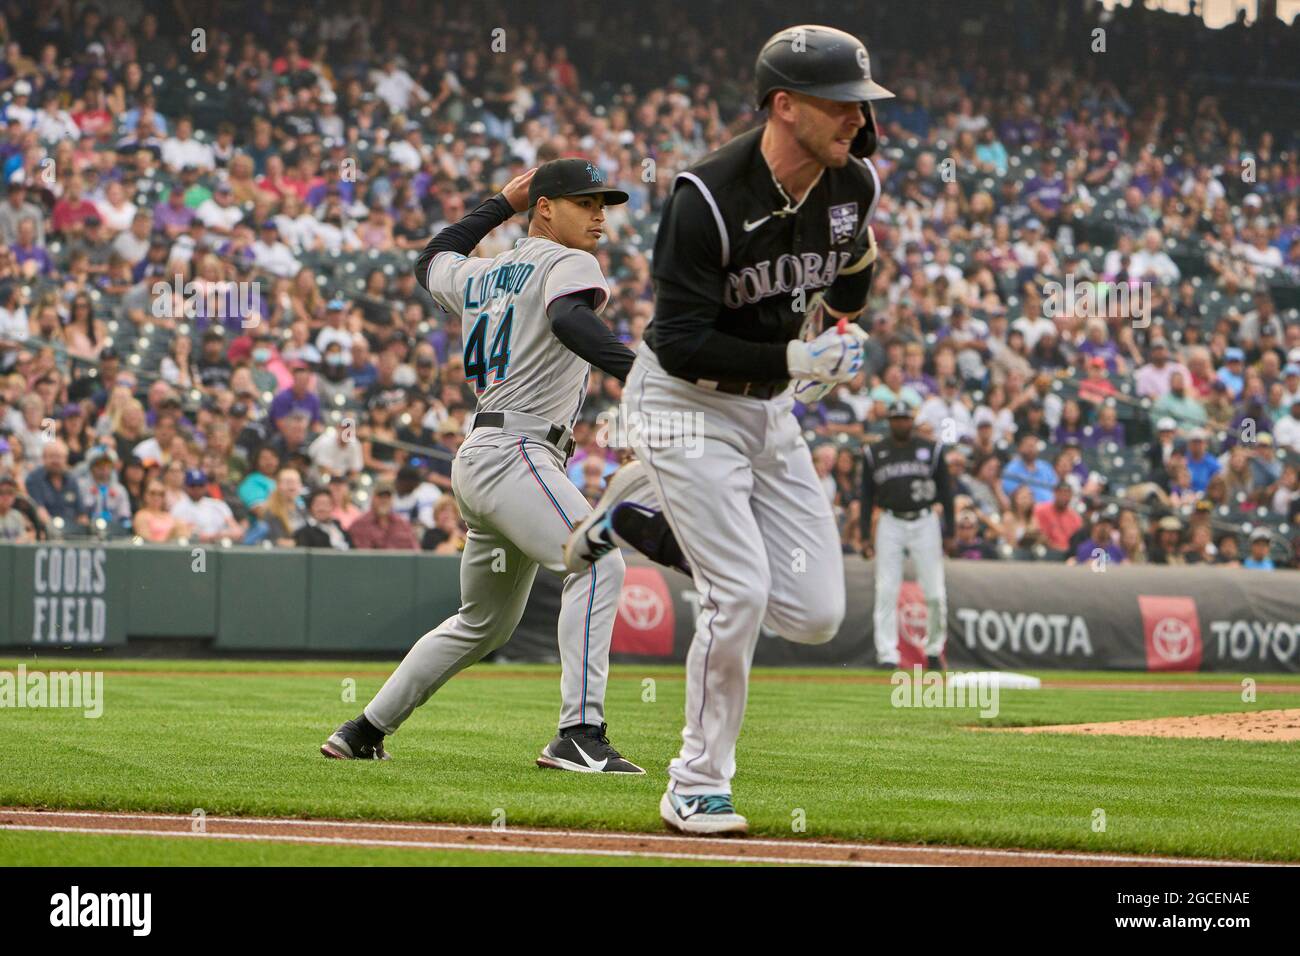 Denver, USA. August 7 2021: Miami left fielder Jorge Alfaro (38) gets a hit  during the game with the Colorado Rockies and Miami Marlins held at Coors  Field in Denver Co. David